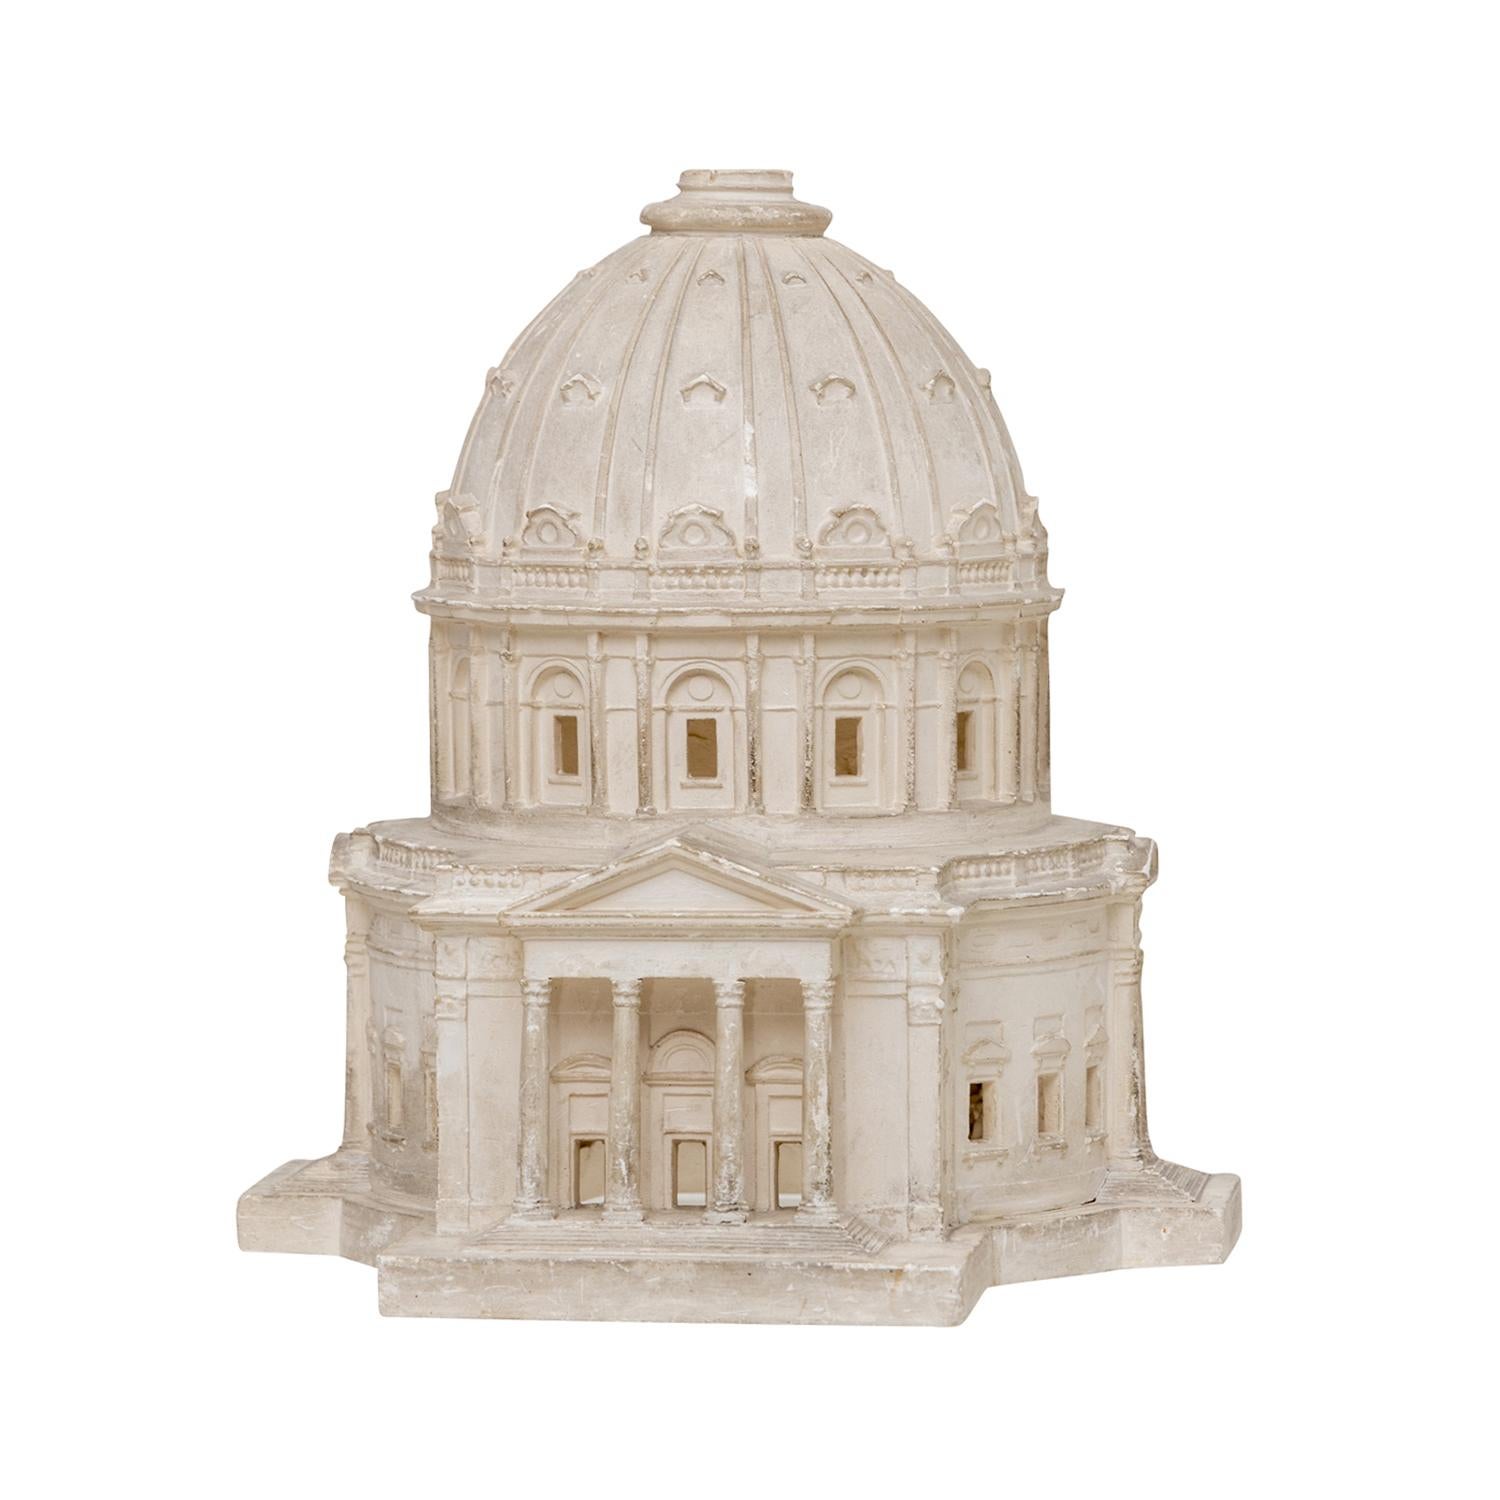 A white, antique Belgian architectural model made of handcrafted plaster of Paris, in good condition. It depicts the Frederik's Church in Copenhagen, Denmark. The main entrance of the detailed cathedral is accessible by a wide staircase,